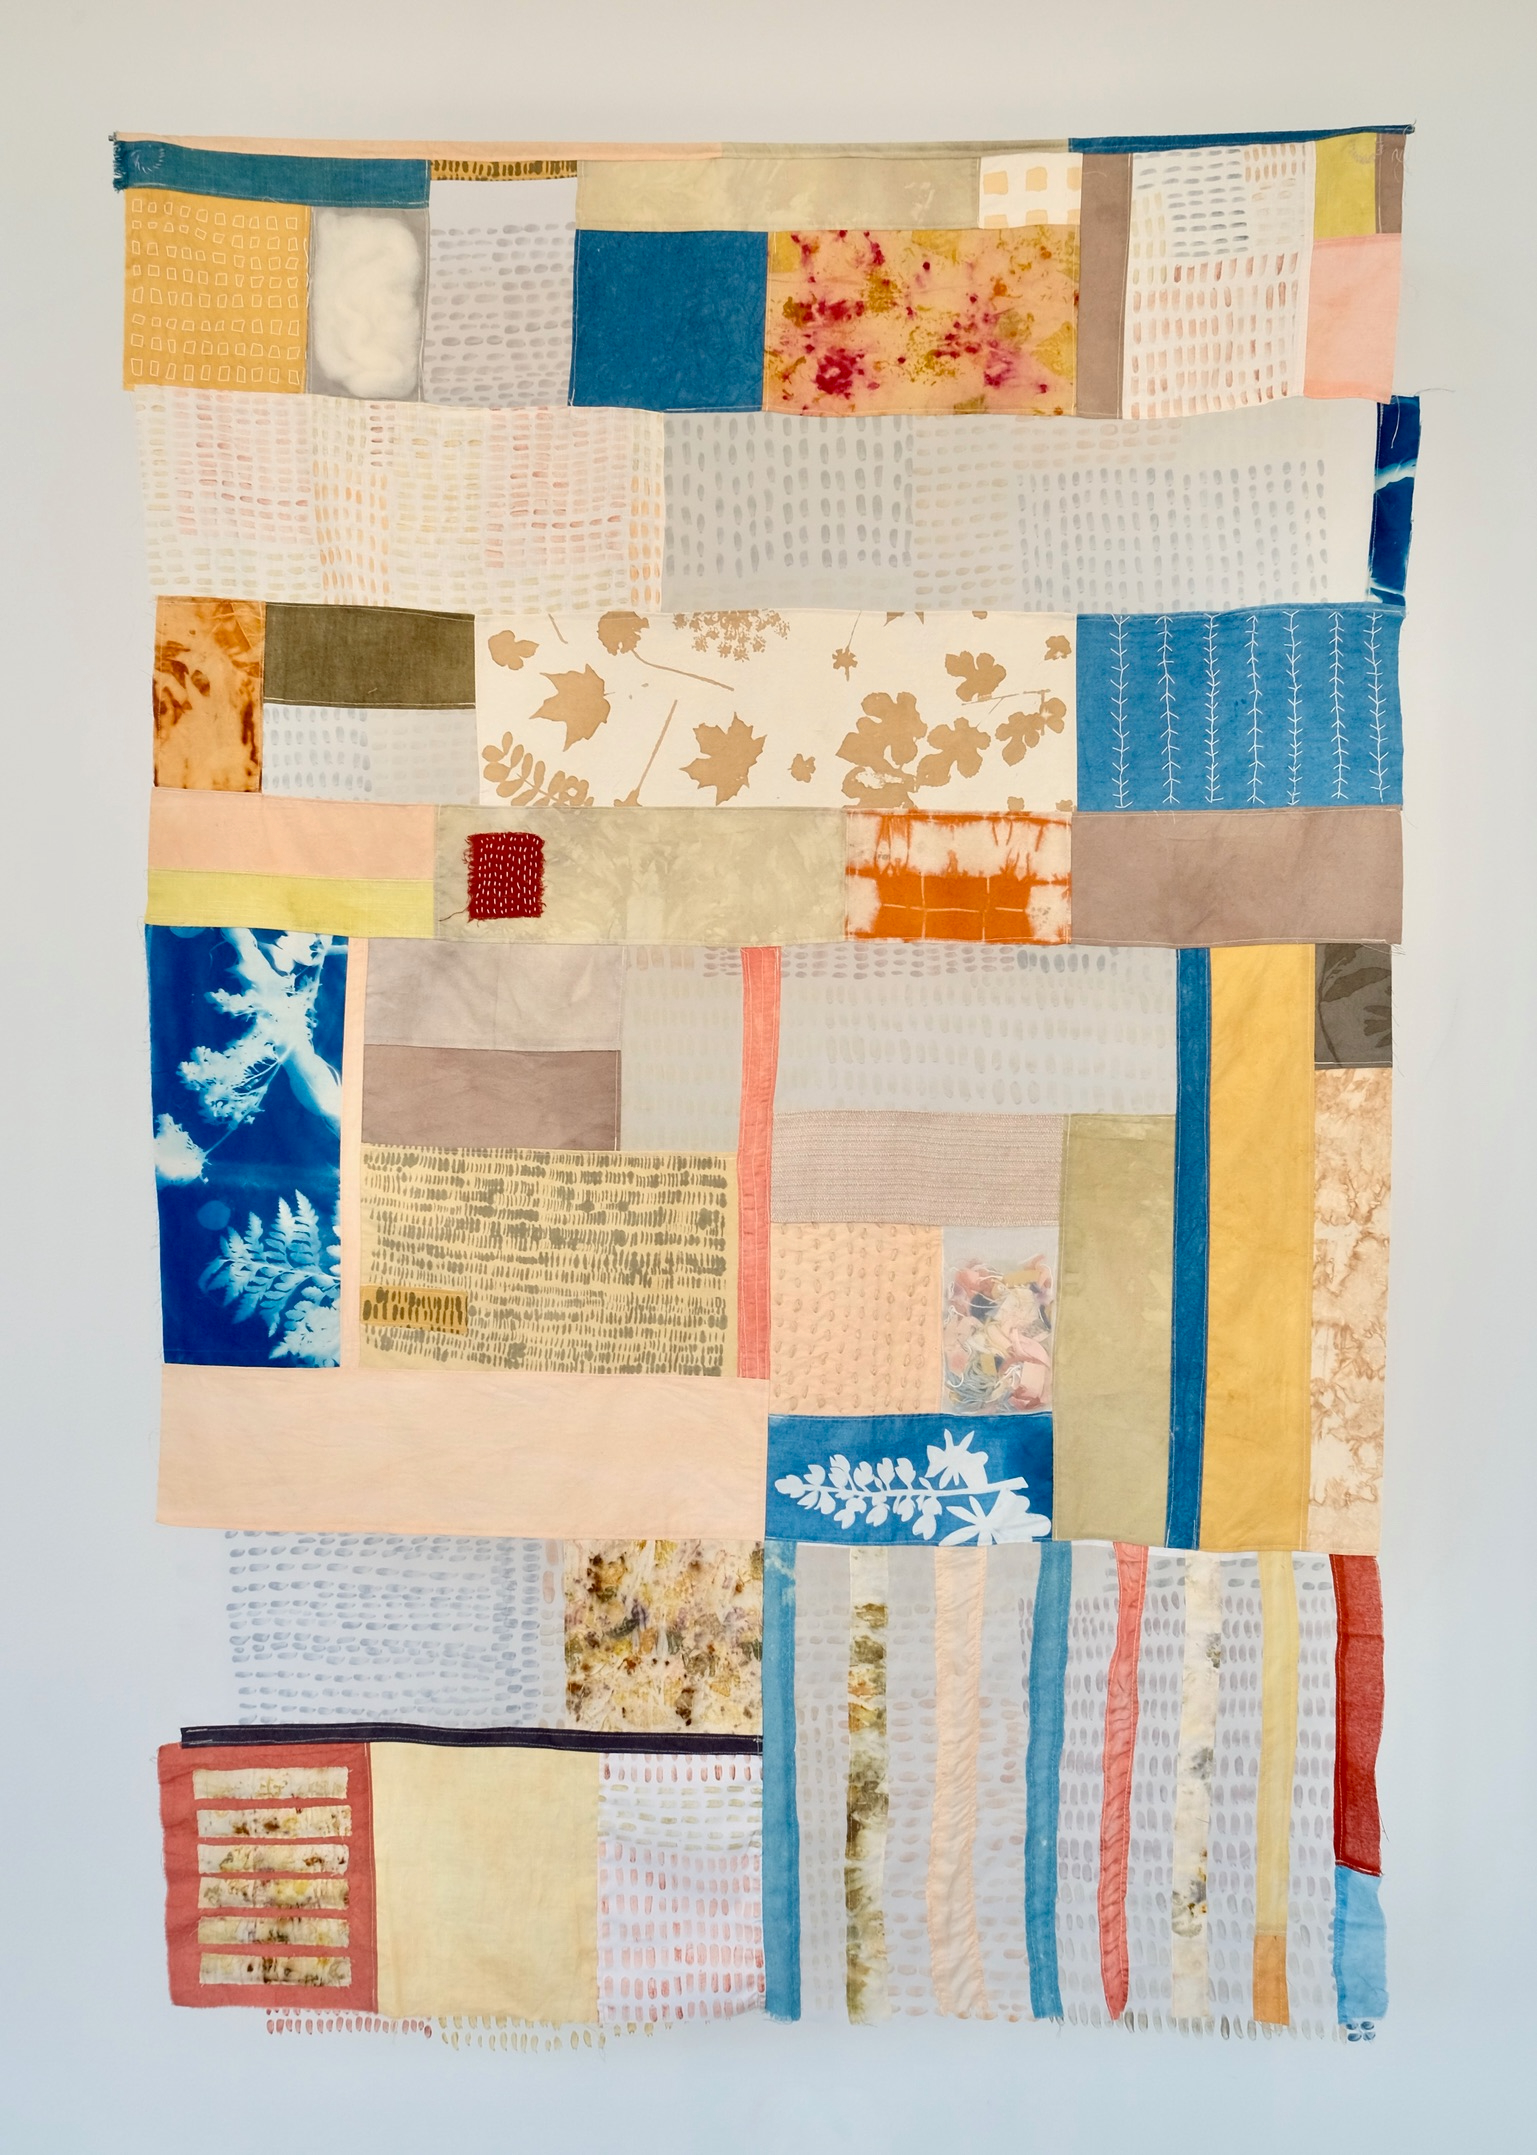 A patchwork quilt hung on a white wall. The quilt is made of naturally dyed fabrics in shades of yellows, reds, blues, and browns.